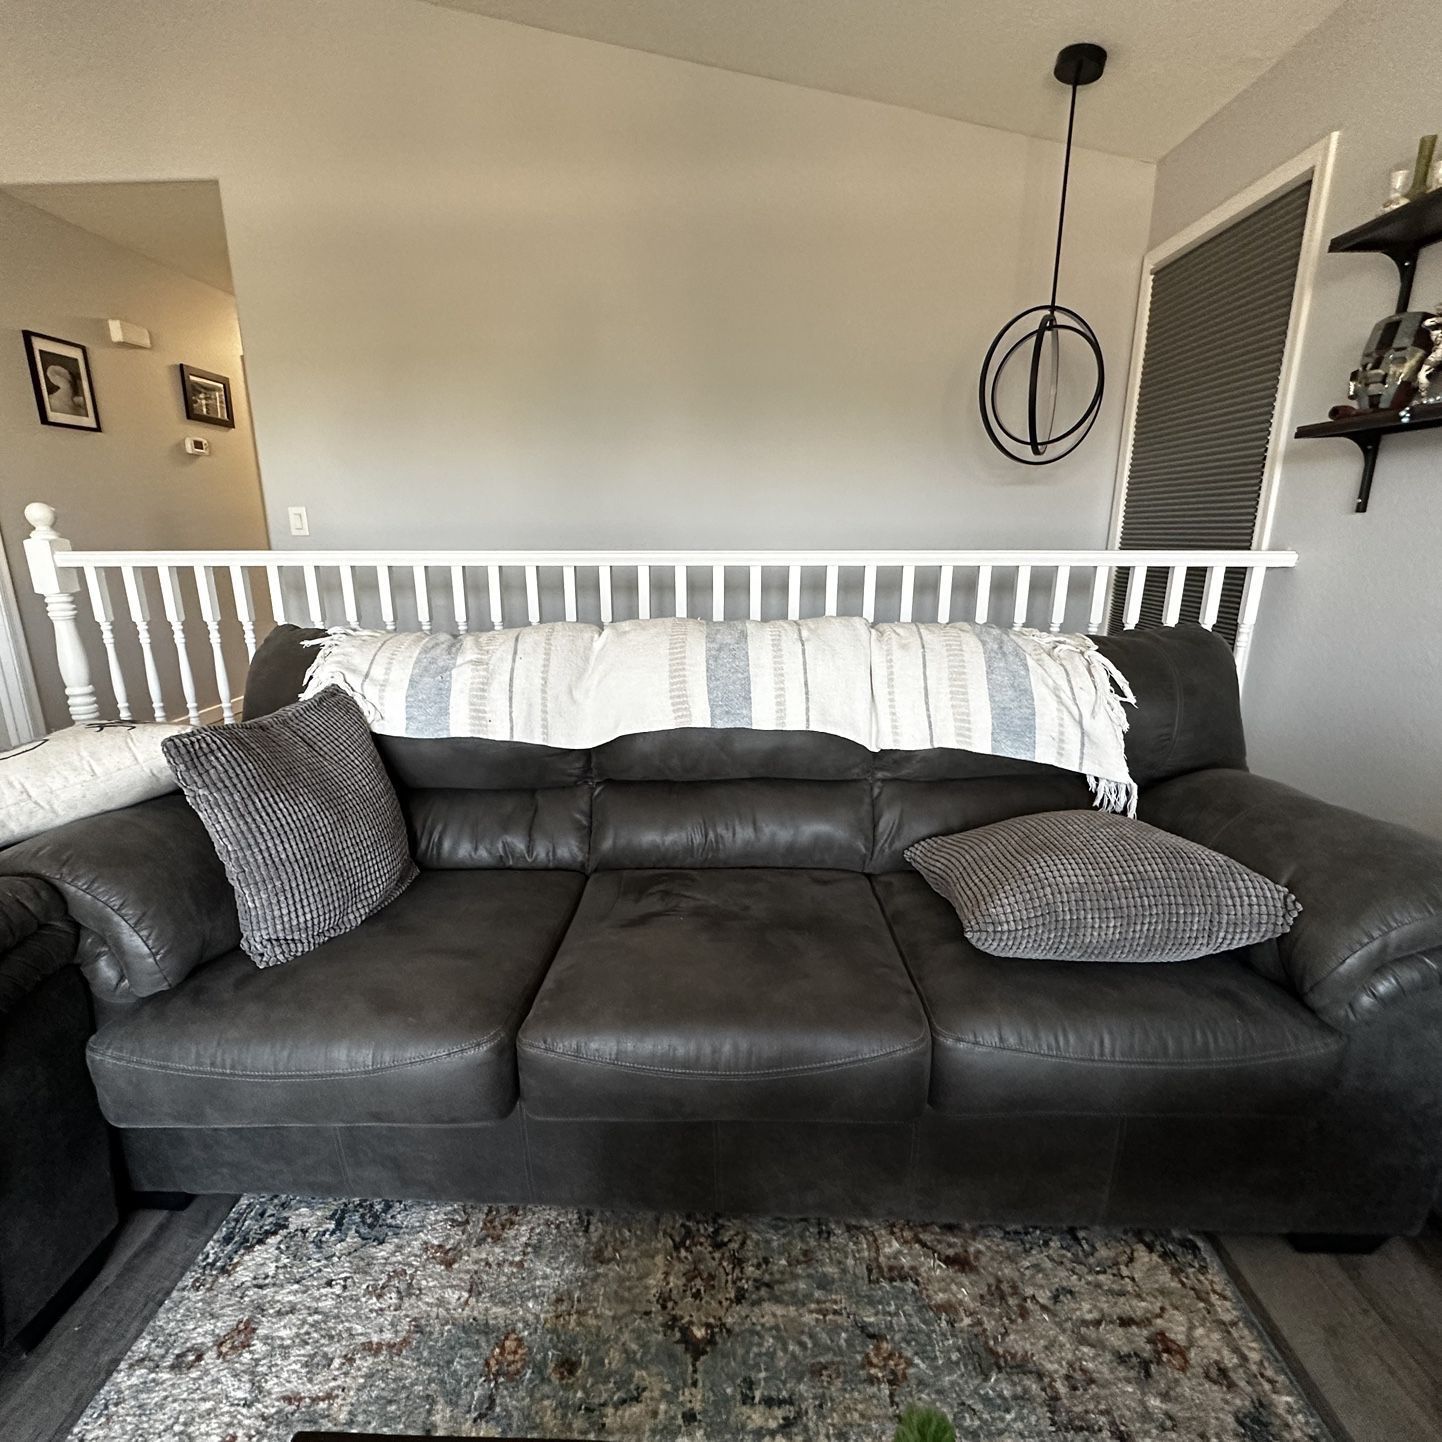 2 Gray/Green Leather Look sofas 